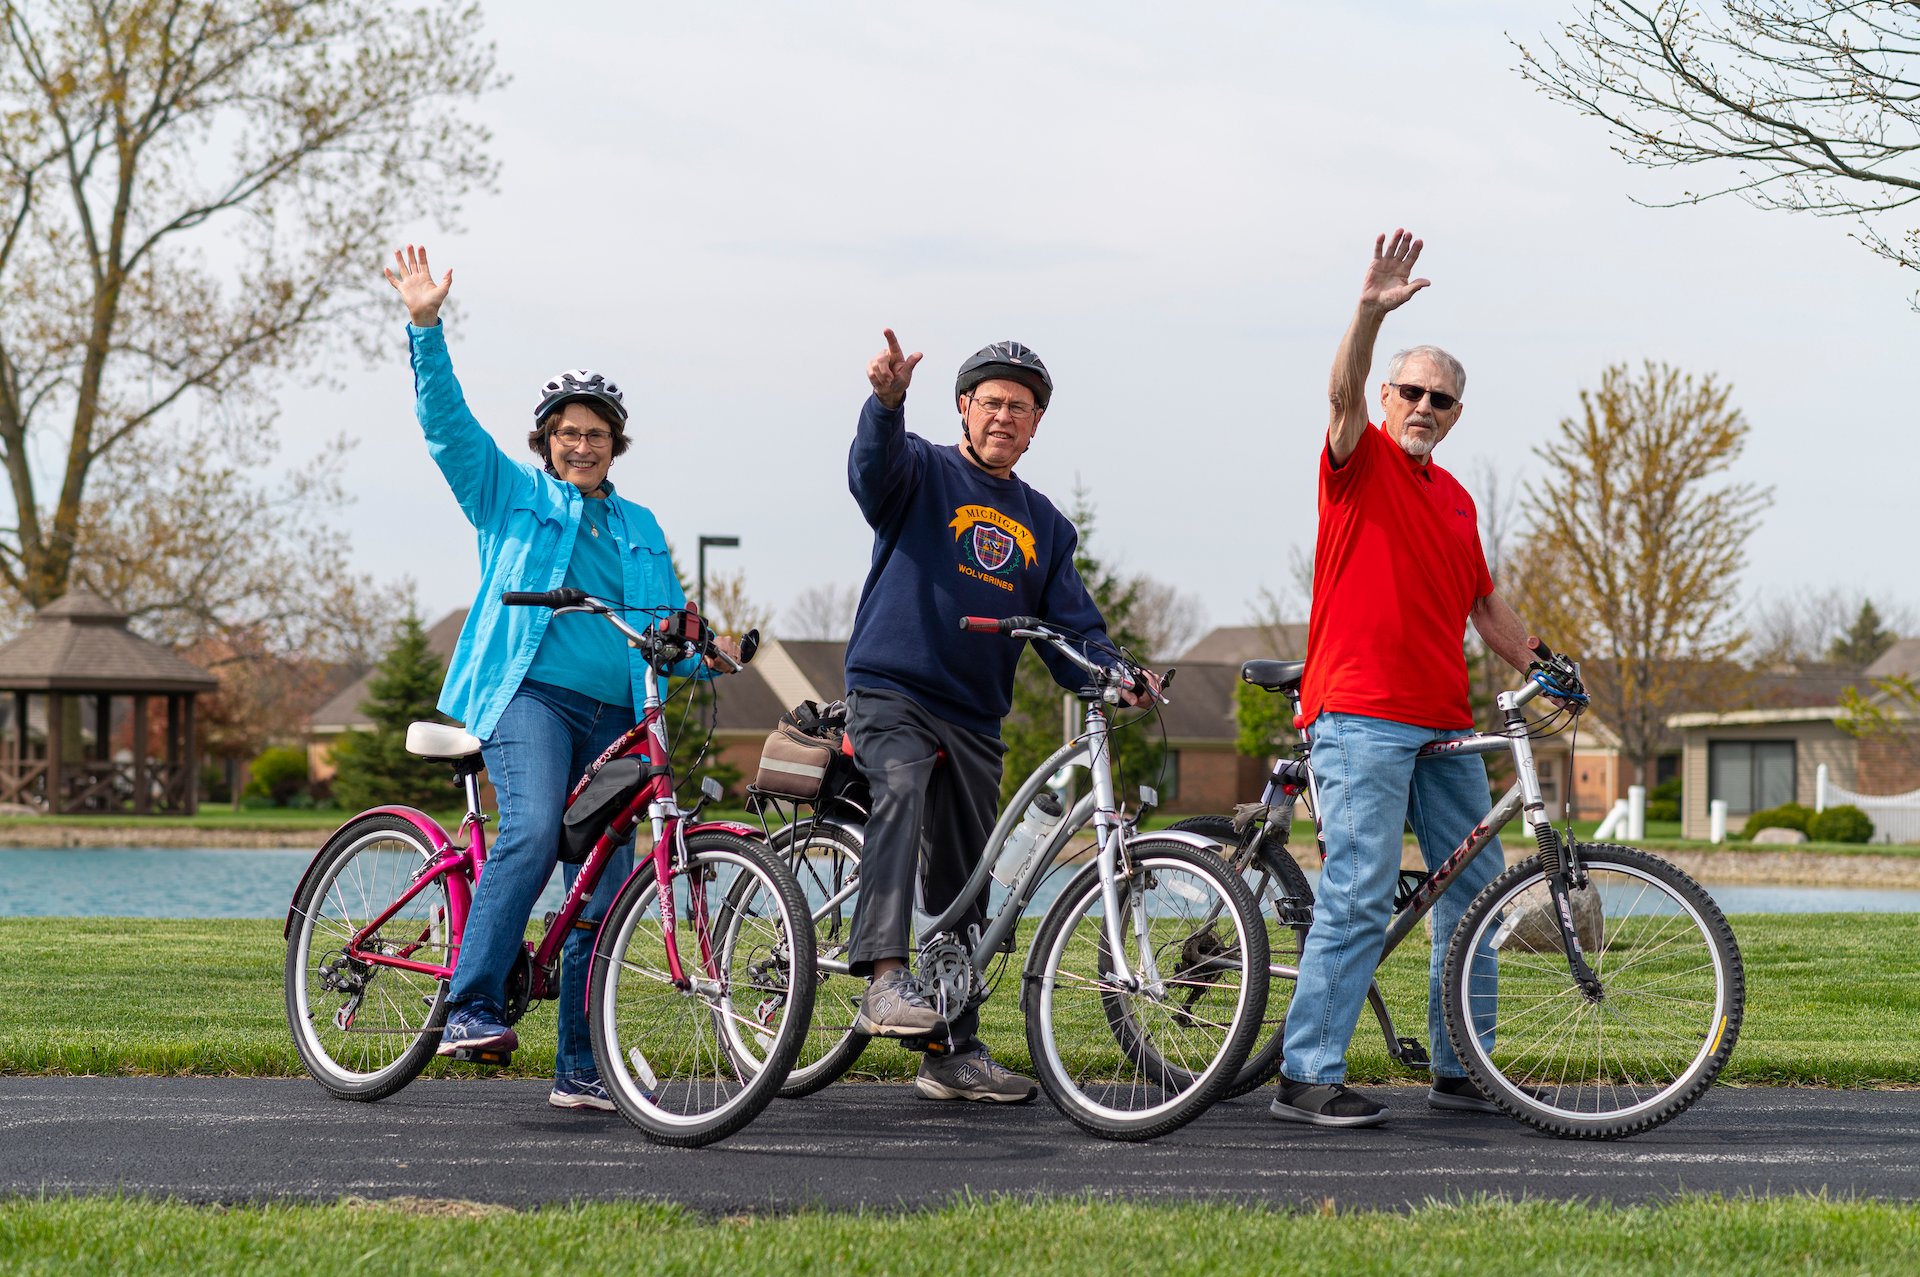 Otterbein Pemberville residents on their bikes waving and smiling.